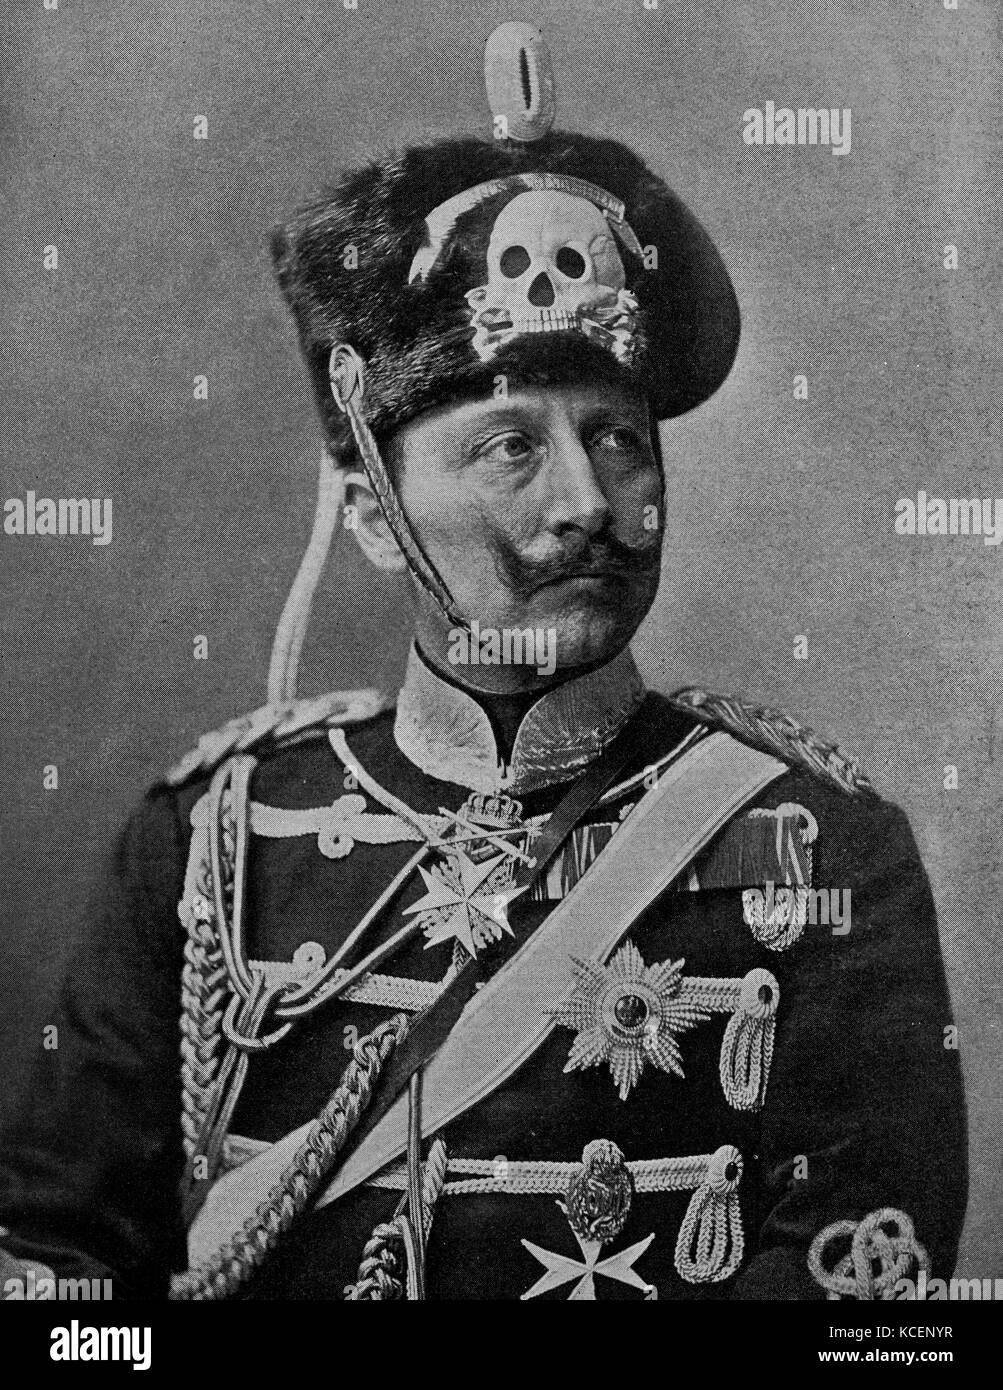 Photograph of Emperor Wilhelm II (1859-1941) King of Prussia and German Emperor. Dated 19th Century Stock Photo